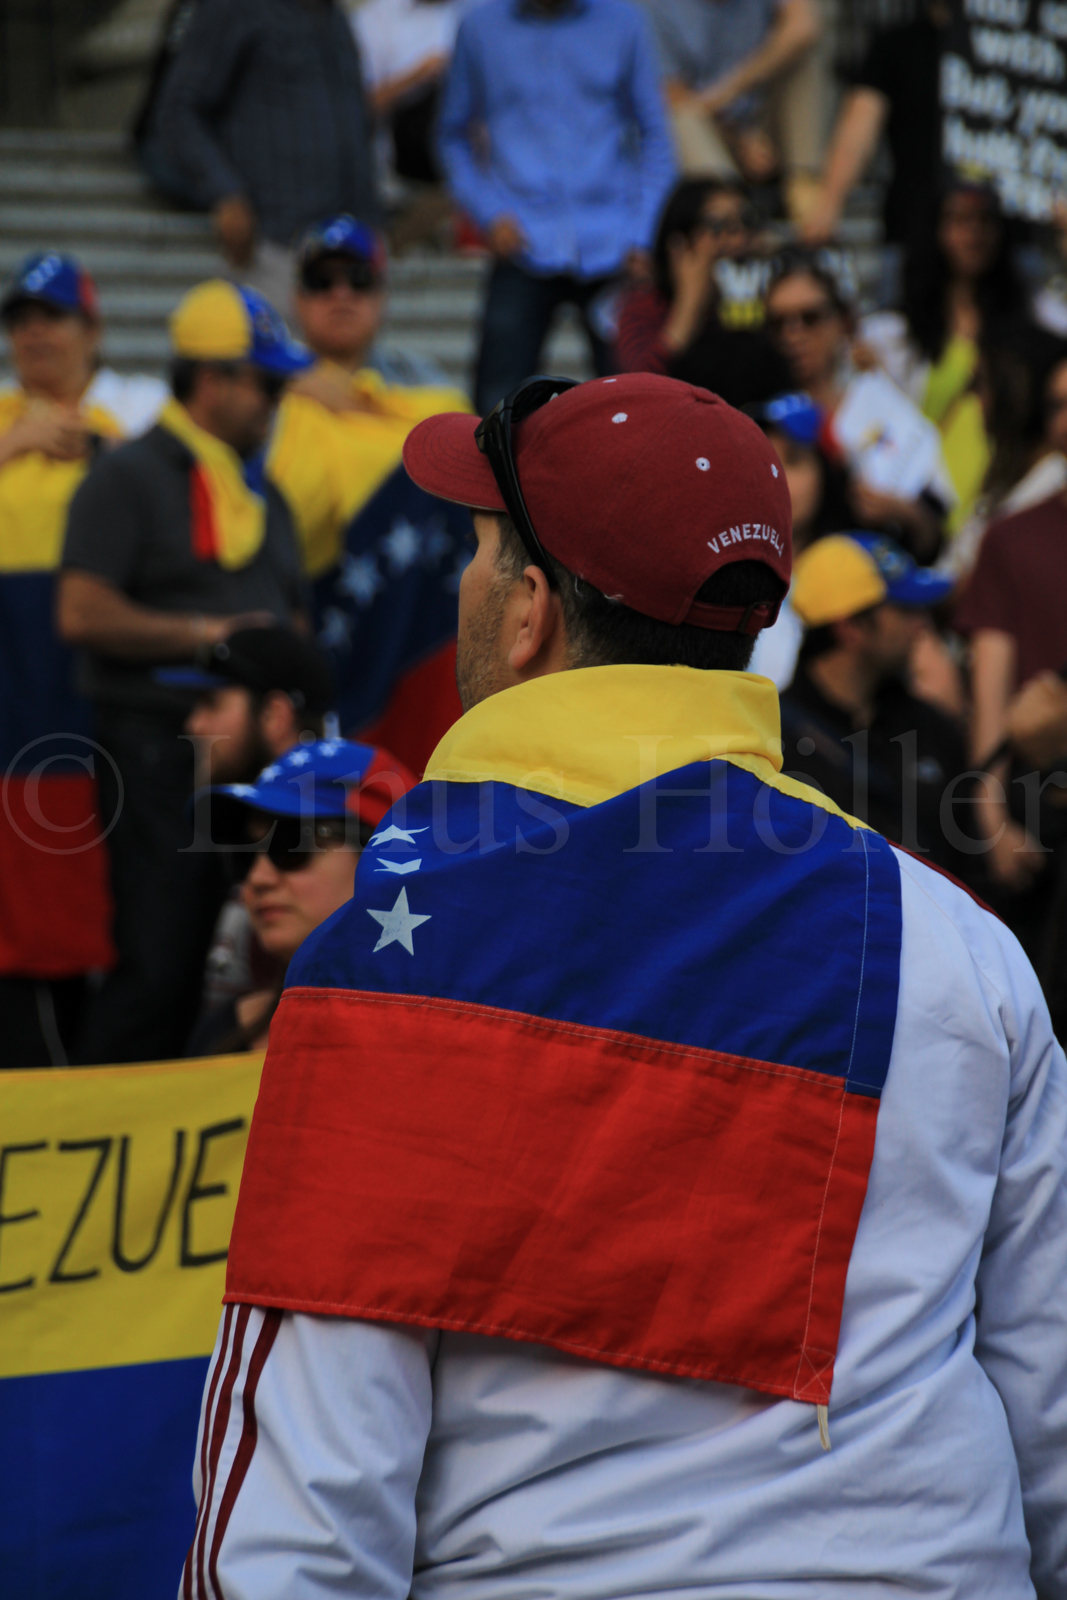 Photos – “People like you are dying in peaceful demonstrations”: Anti- and pro-Maduro protests meet